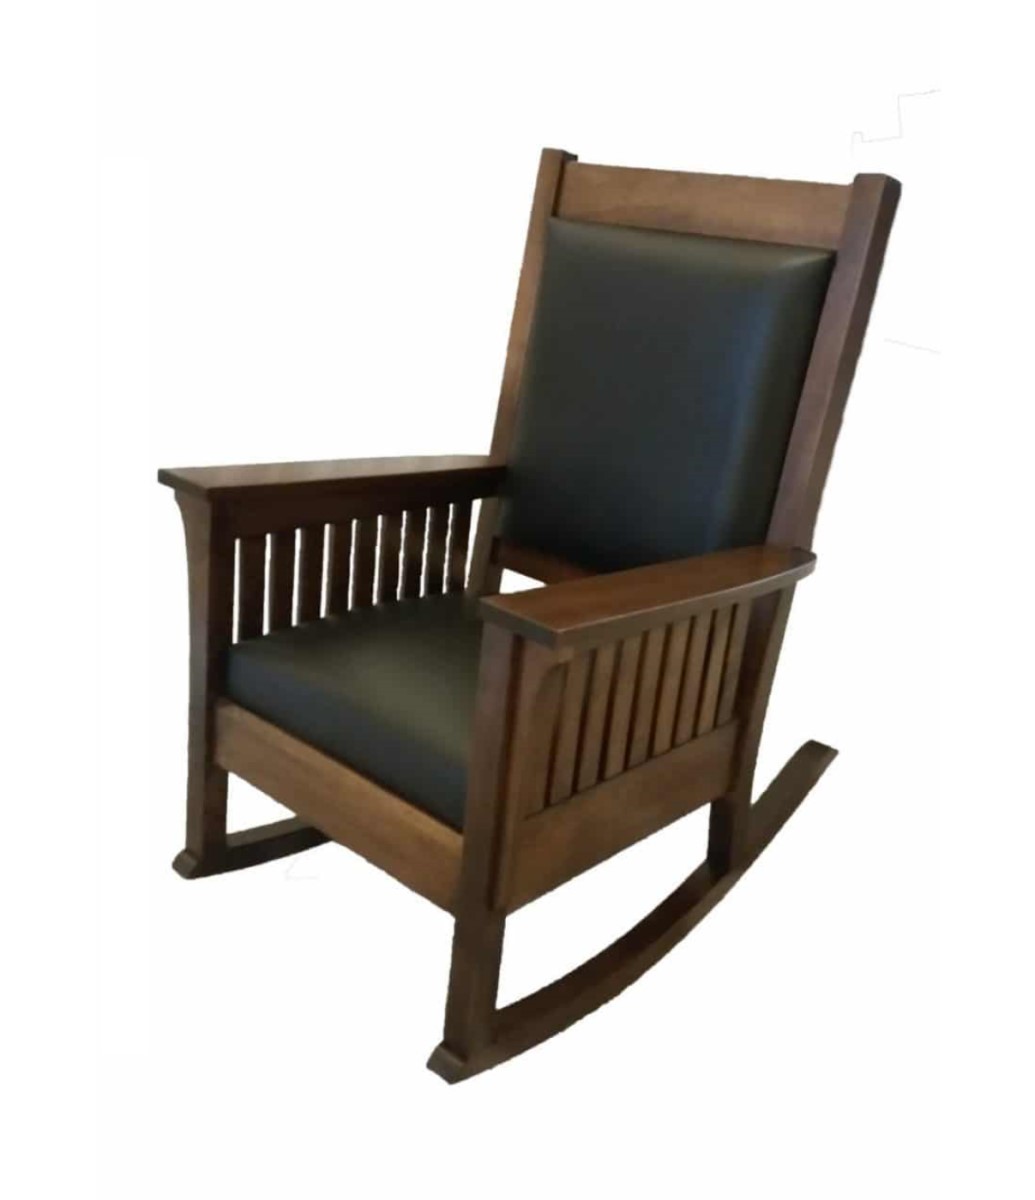 Affinity Mission Rocking Chair Amrc, Antique Oak Rocking Chair Leather Seat